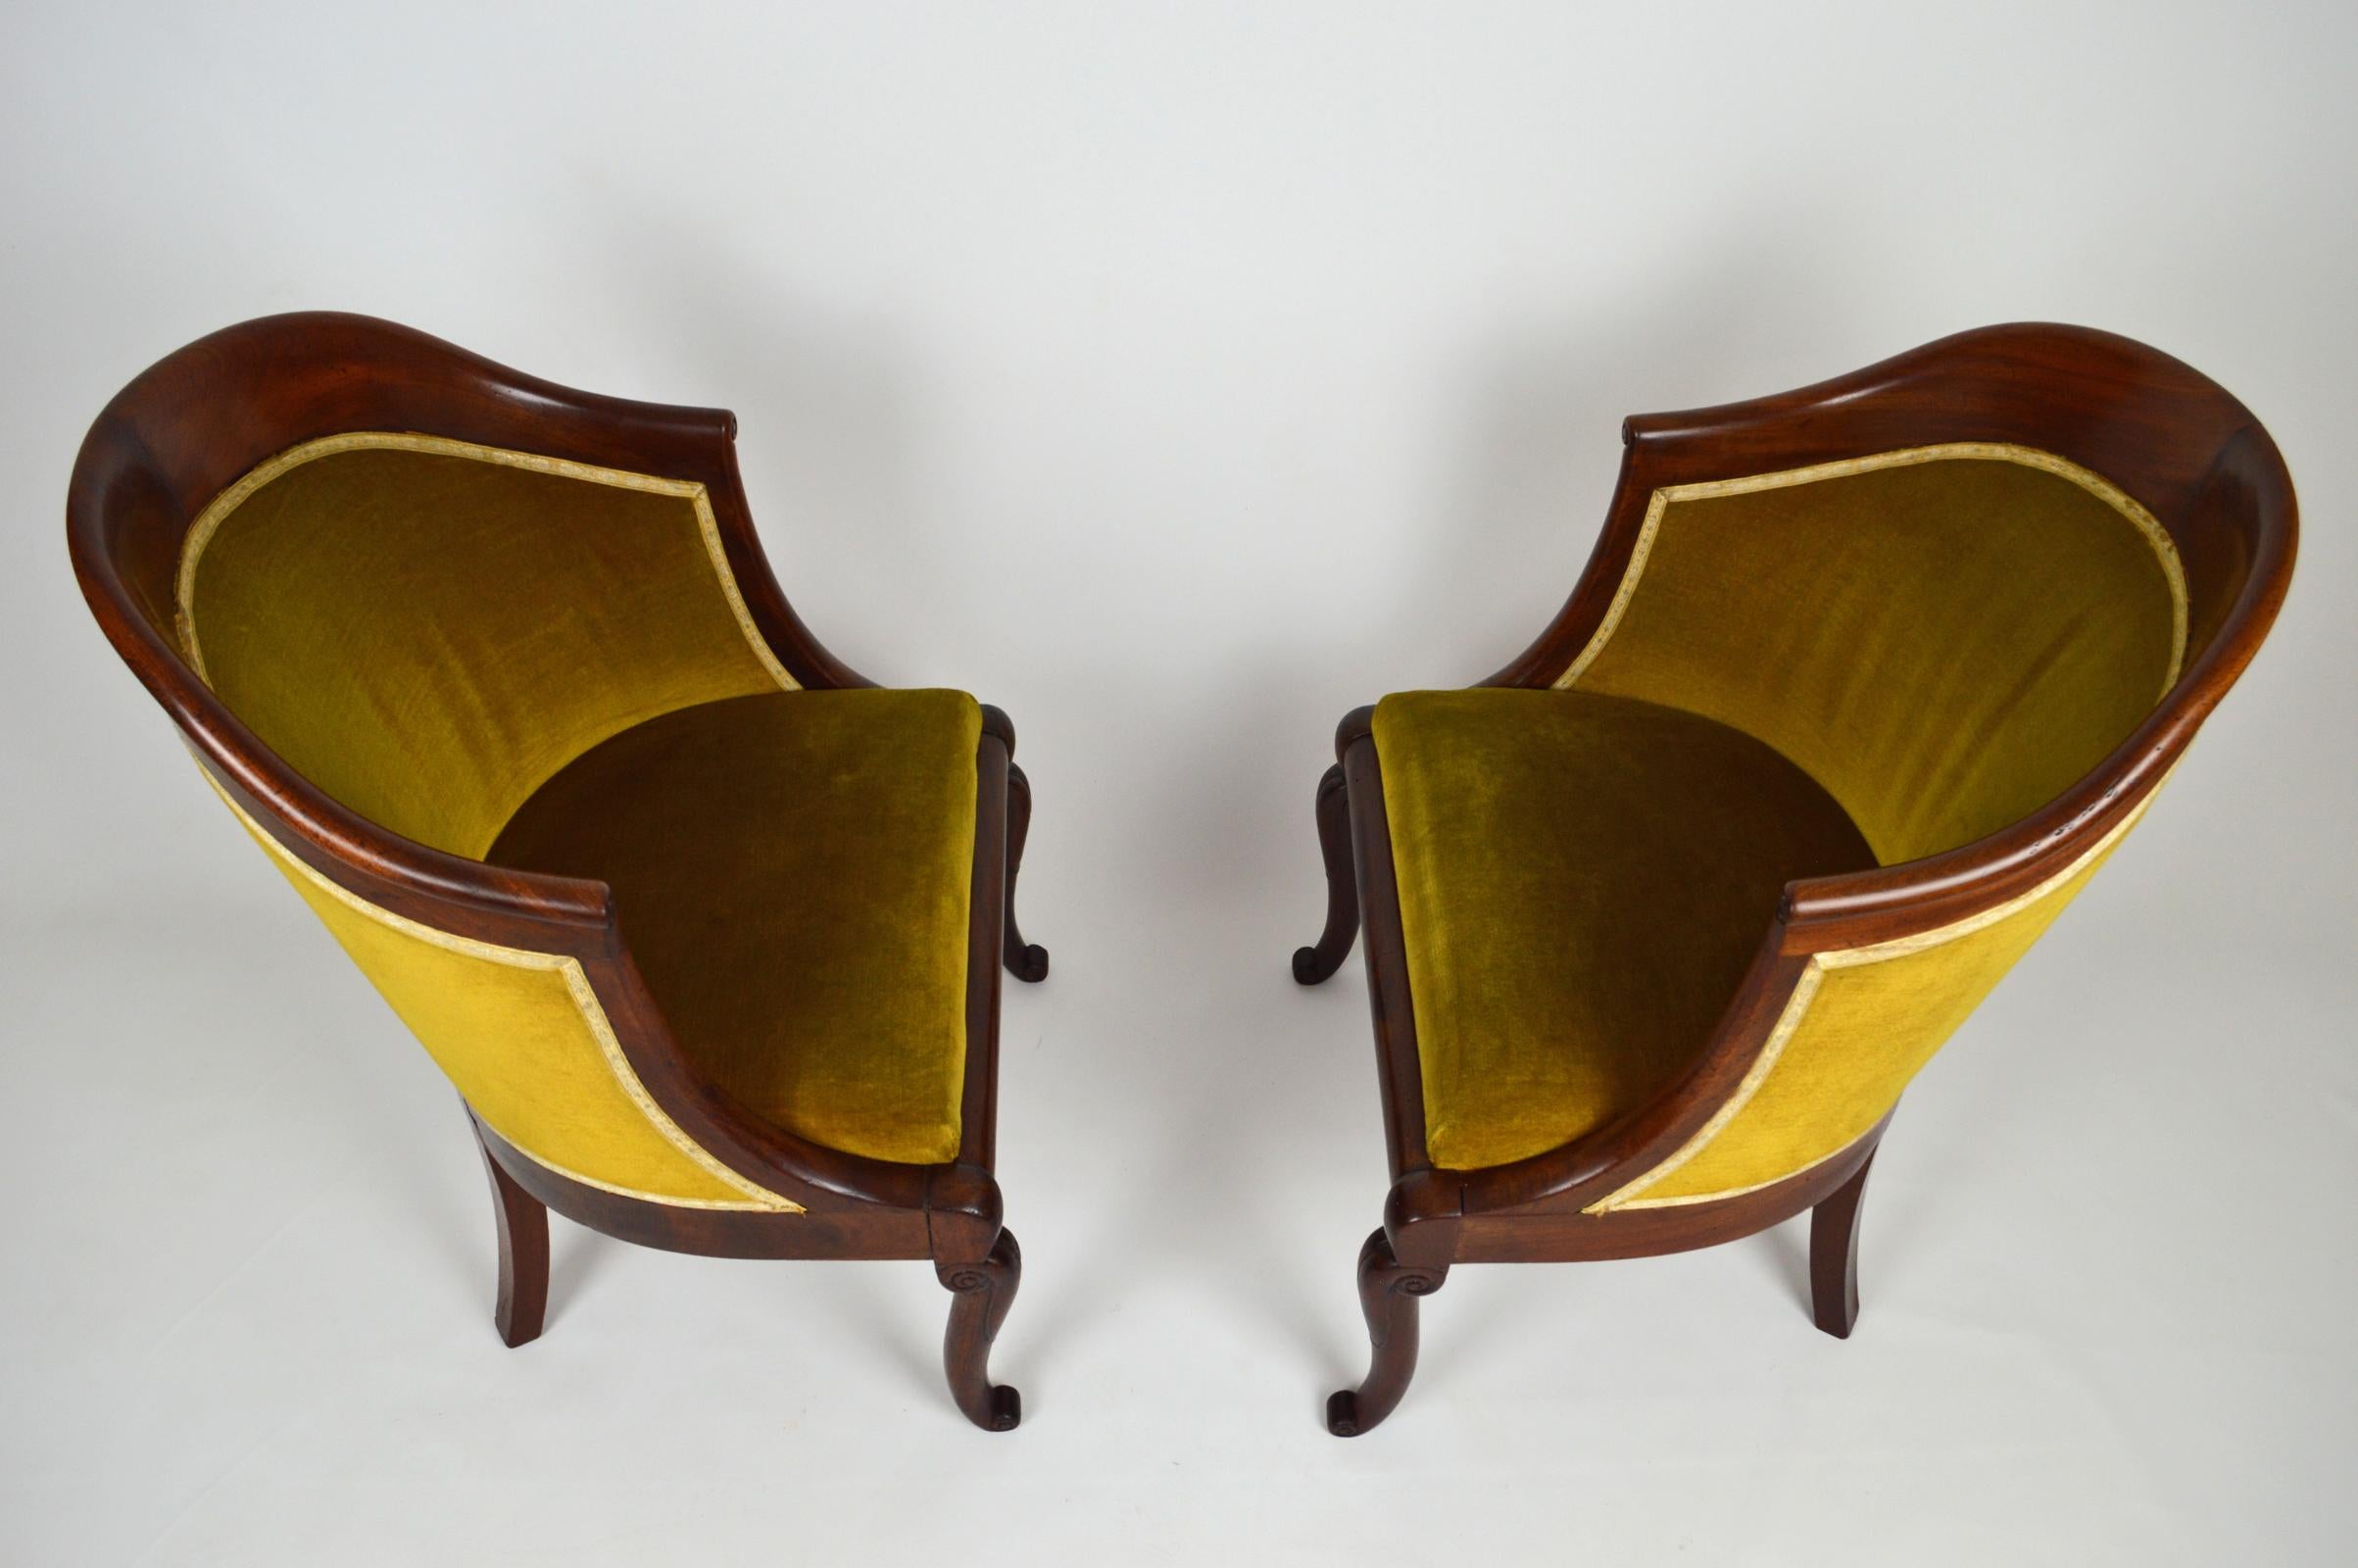 Pair of Armchairs / Tub Chairs in Carved Mahogany, France, Early 19th Century For Sale 1